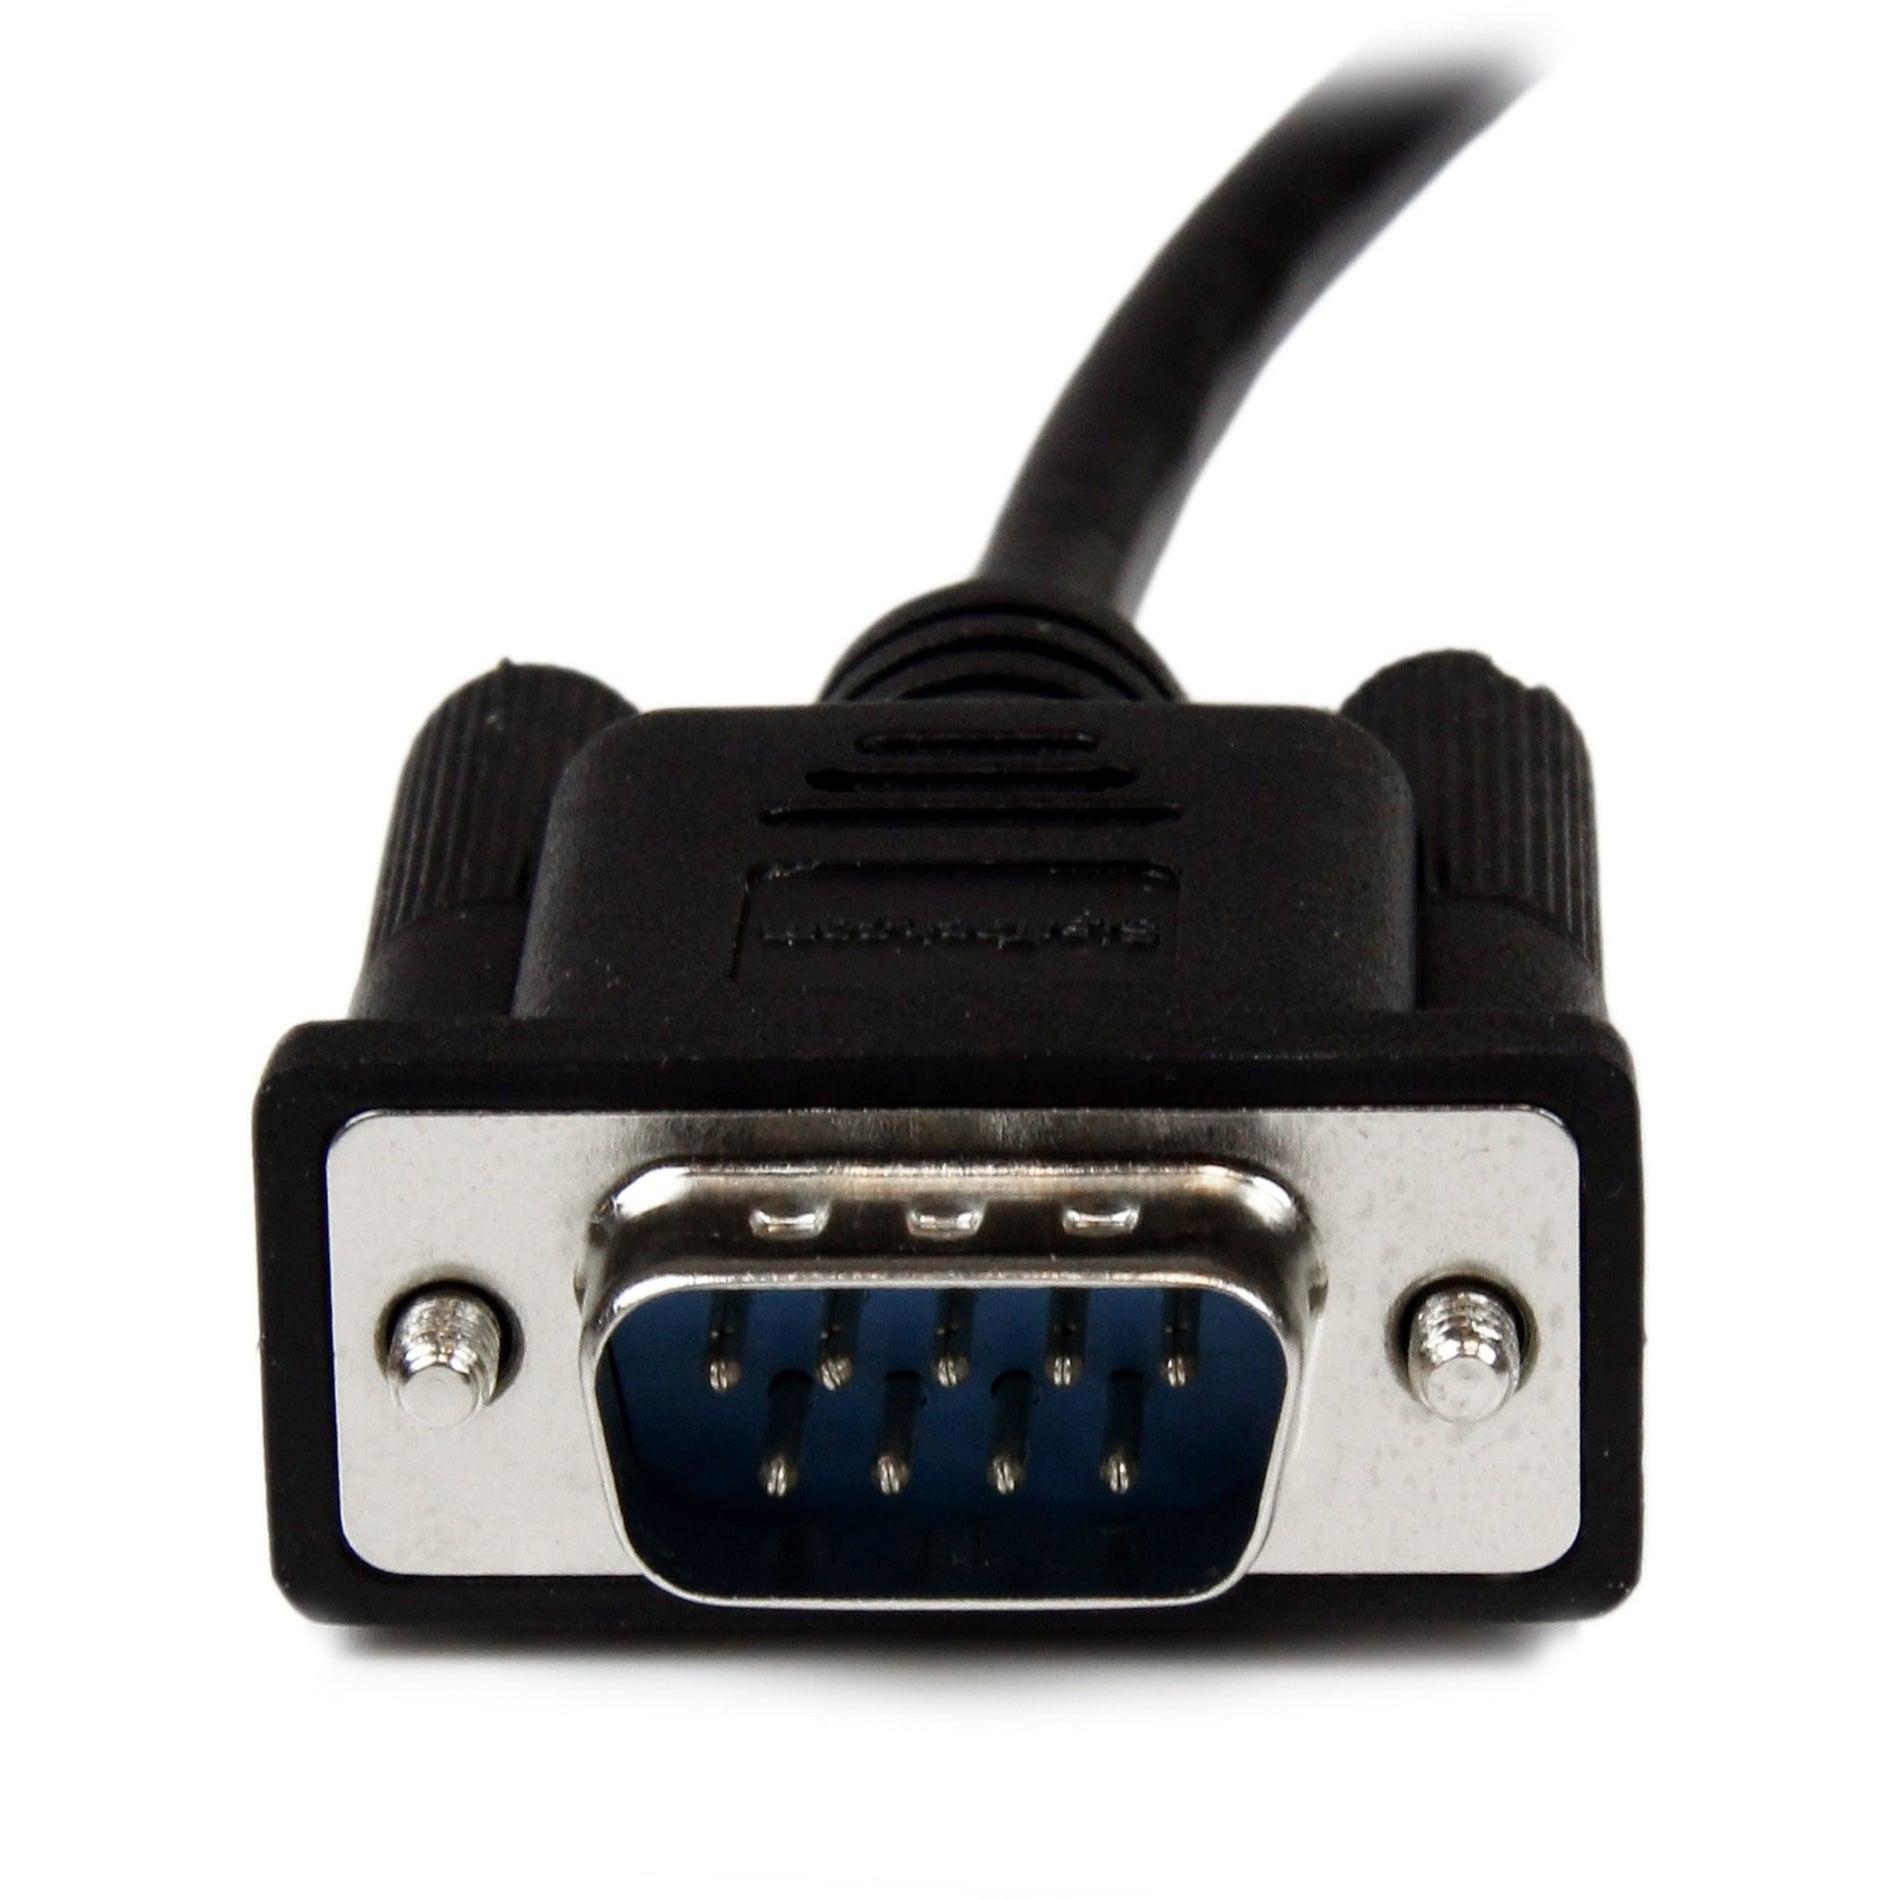 StarTech.com SCNM9FM2MBK 2m Black DB9 RS232 Serial Null Modem Cable F/M, Molded, Strain Relief, EMI Protection